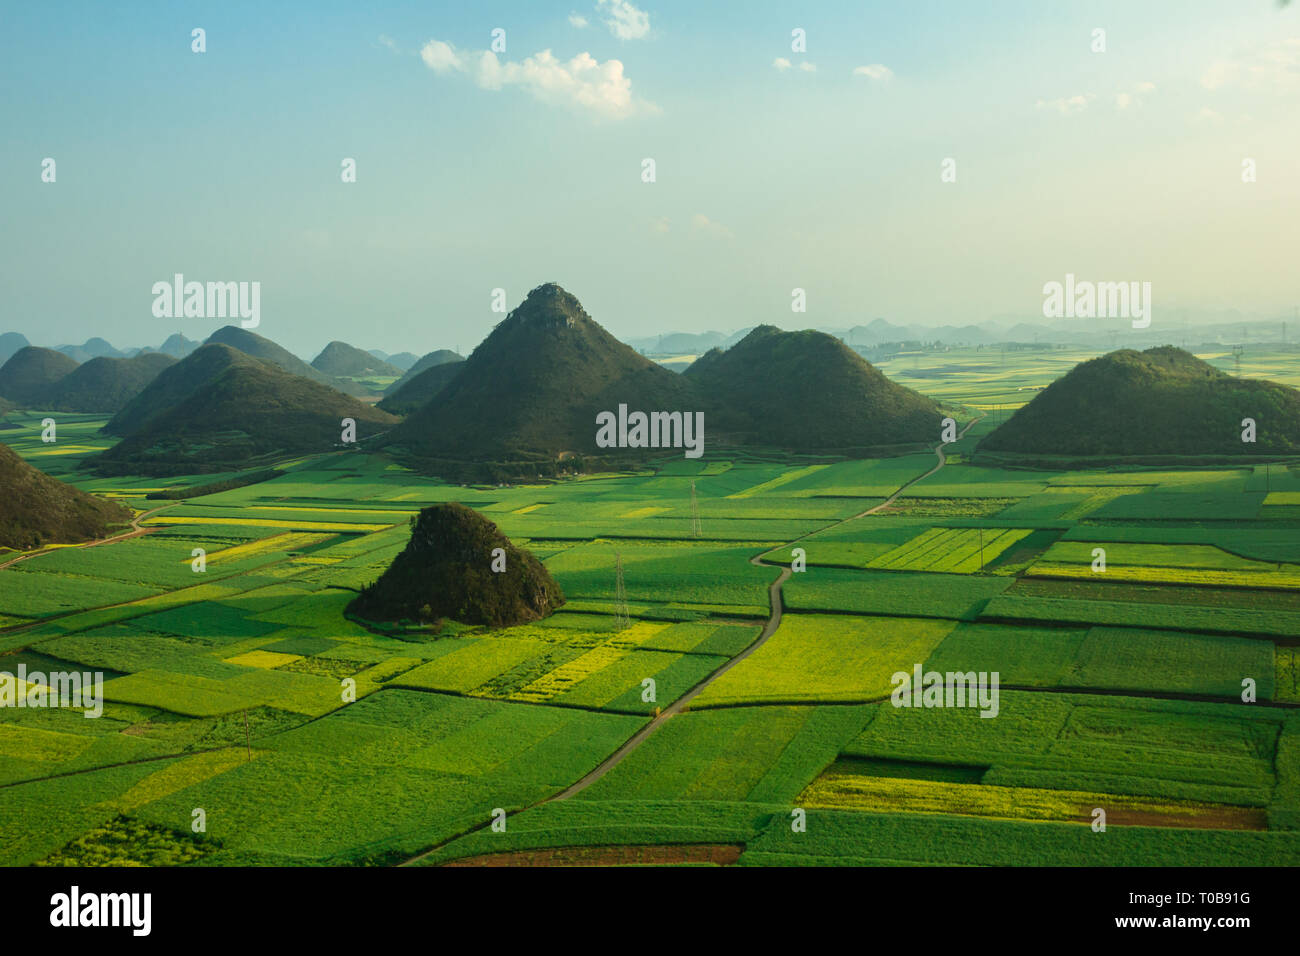 Rapeseed fields and mountains in Luoping, Chinese countryside Stock Photo